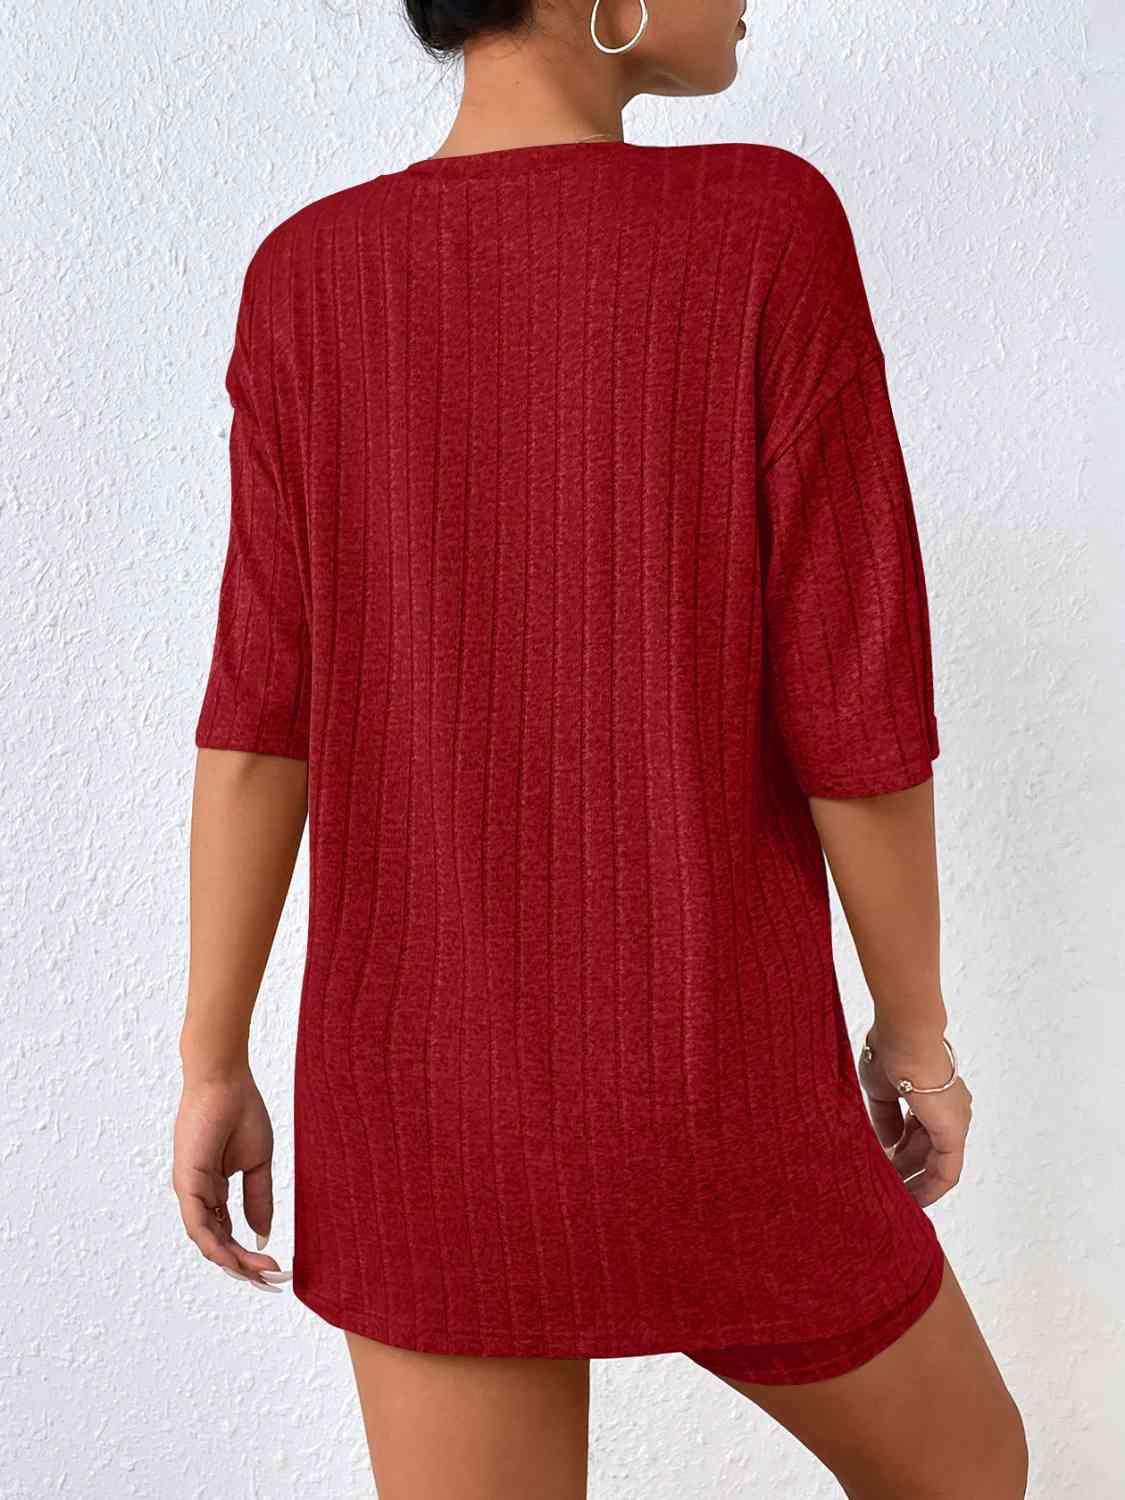 a woman wearing a red sweater dress